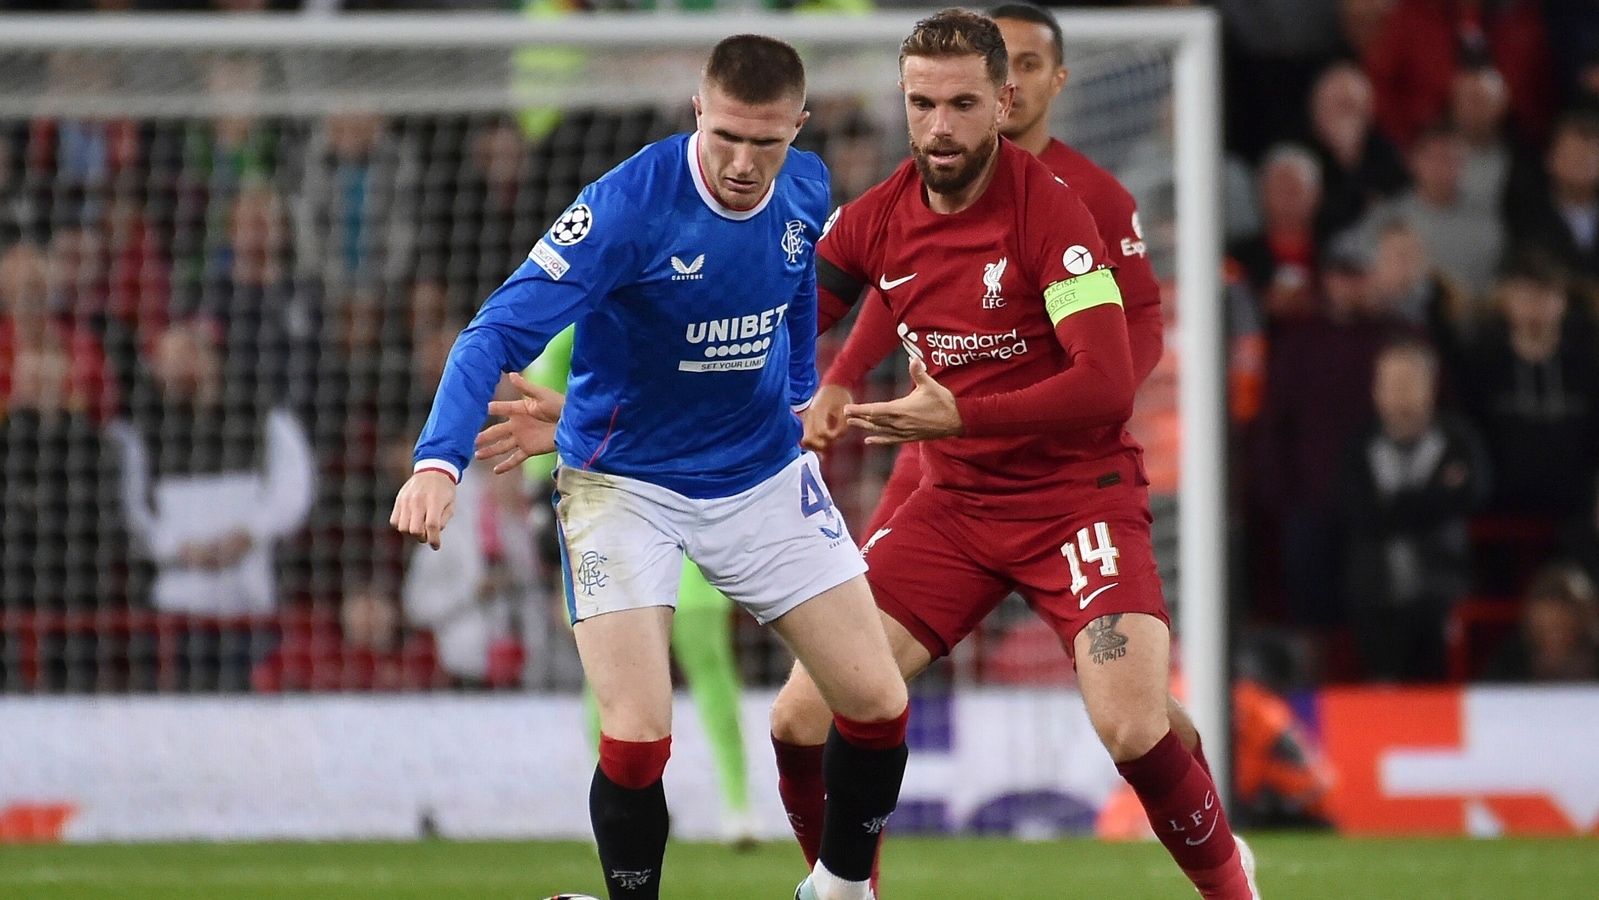 liverpool-saunter-past-rangers-2-0-in-champions-league